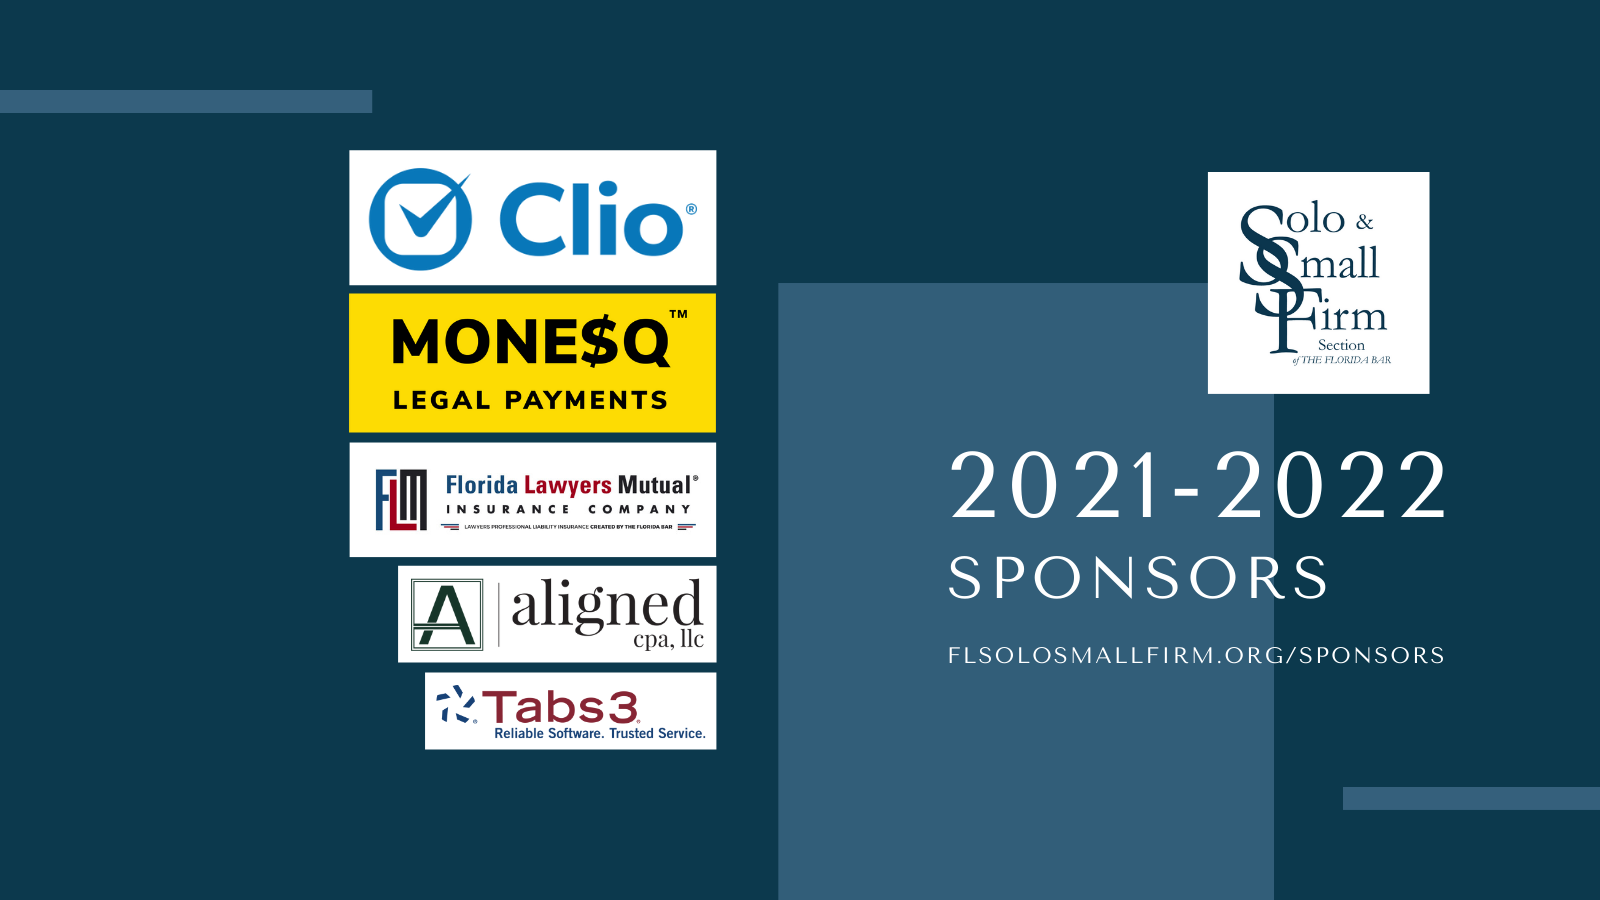 Thank you to our 2021-2022 sponsors.